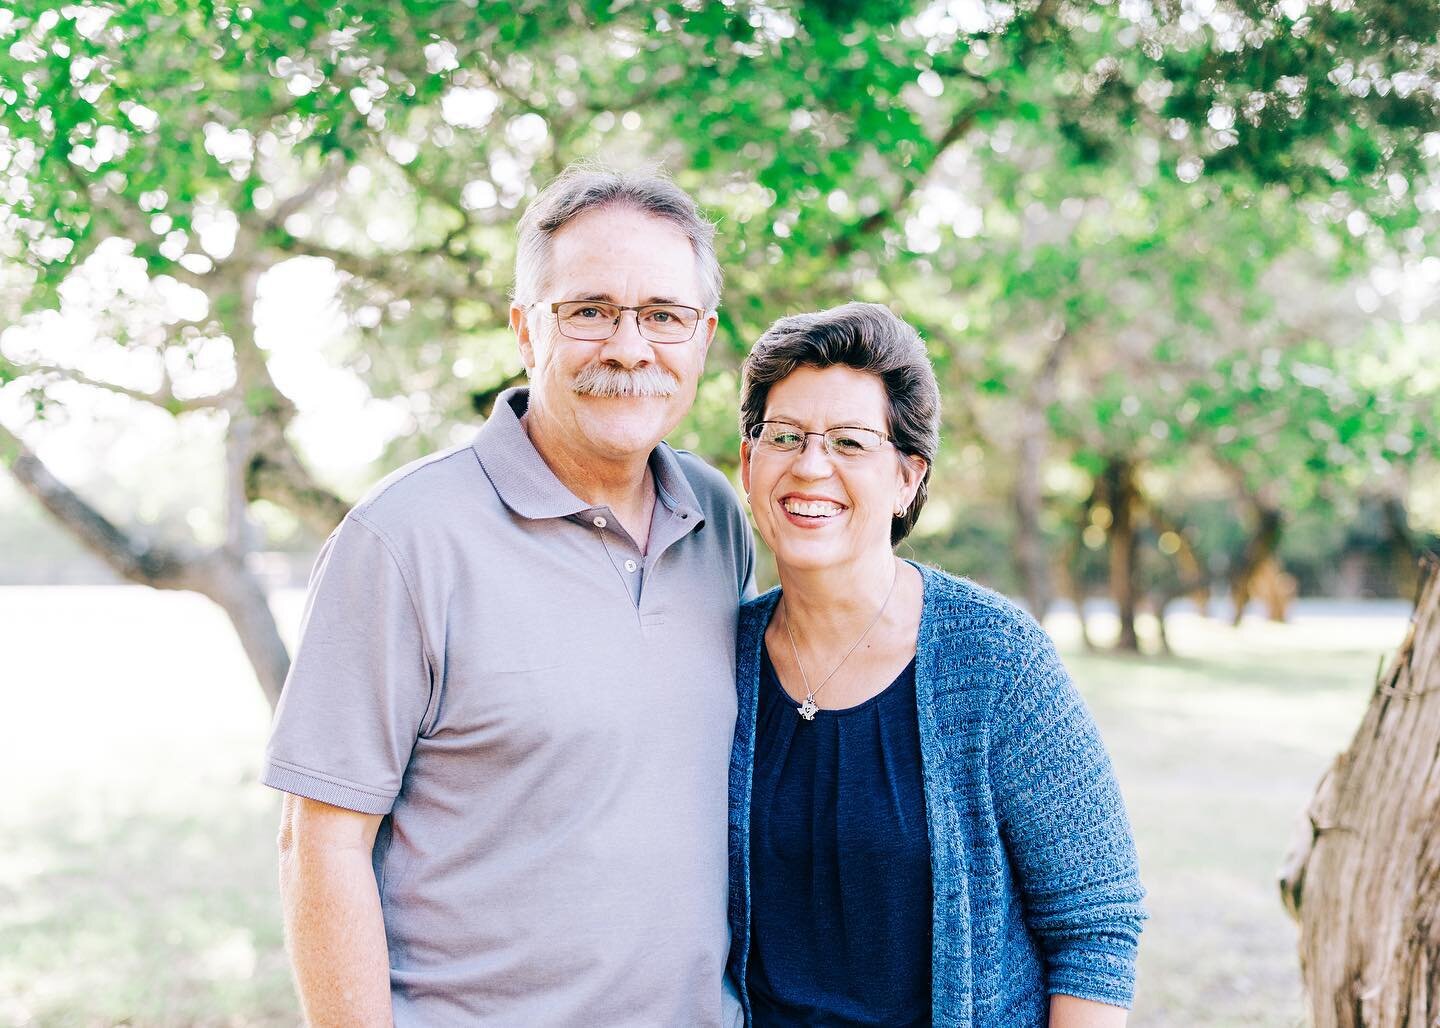 A couple weeks before I left Texas, I had the honor of photographing my dear friend (and past coworker) Kim&rsquo;s family at their home! What a blessing it was getting to meet her and getting to know her family while living in Texas!